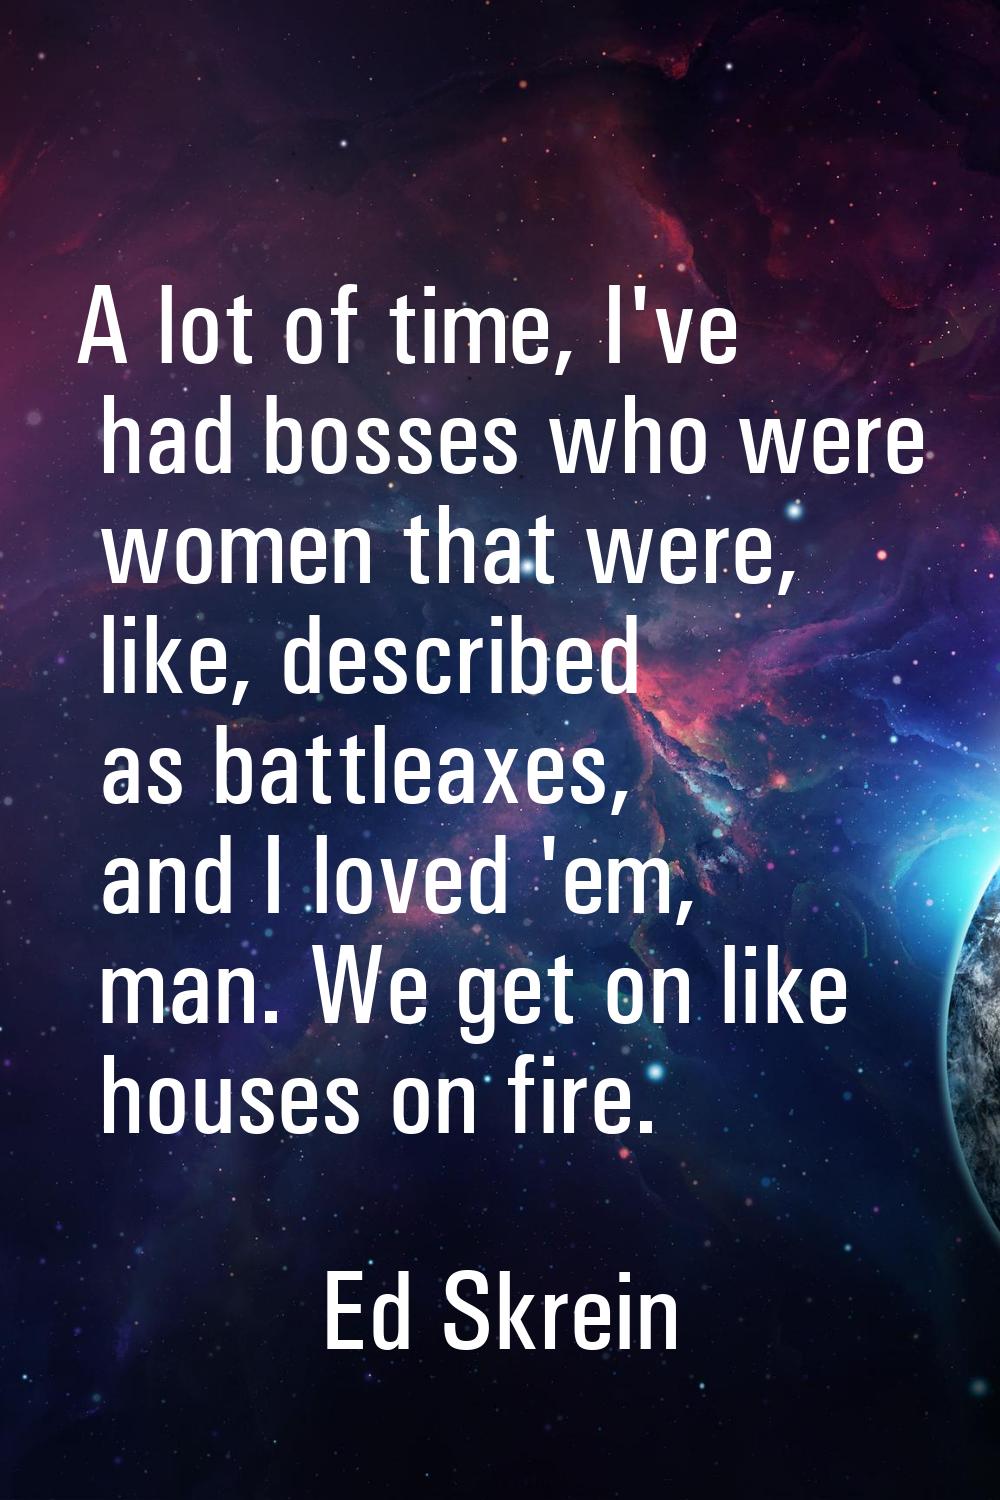 A lot of time, I've had bosses who were women that were, like, described as battleaxes, and I loved